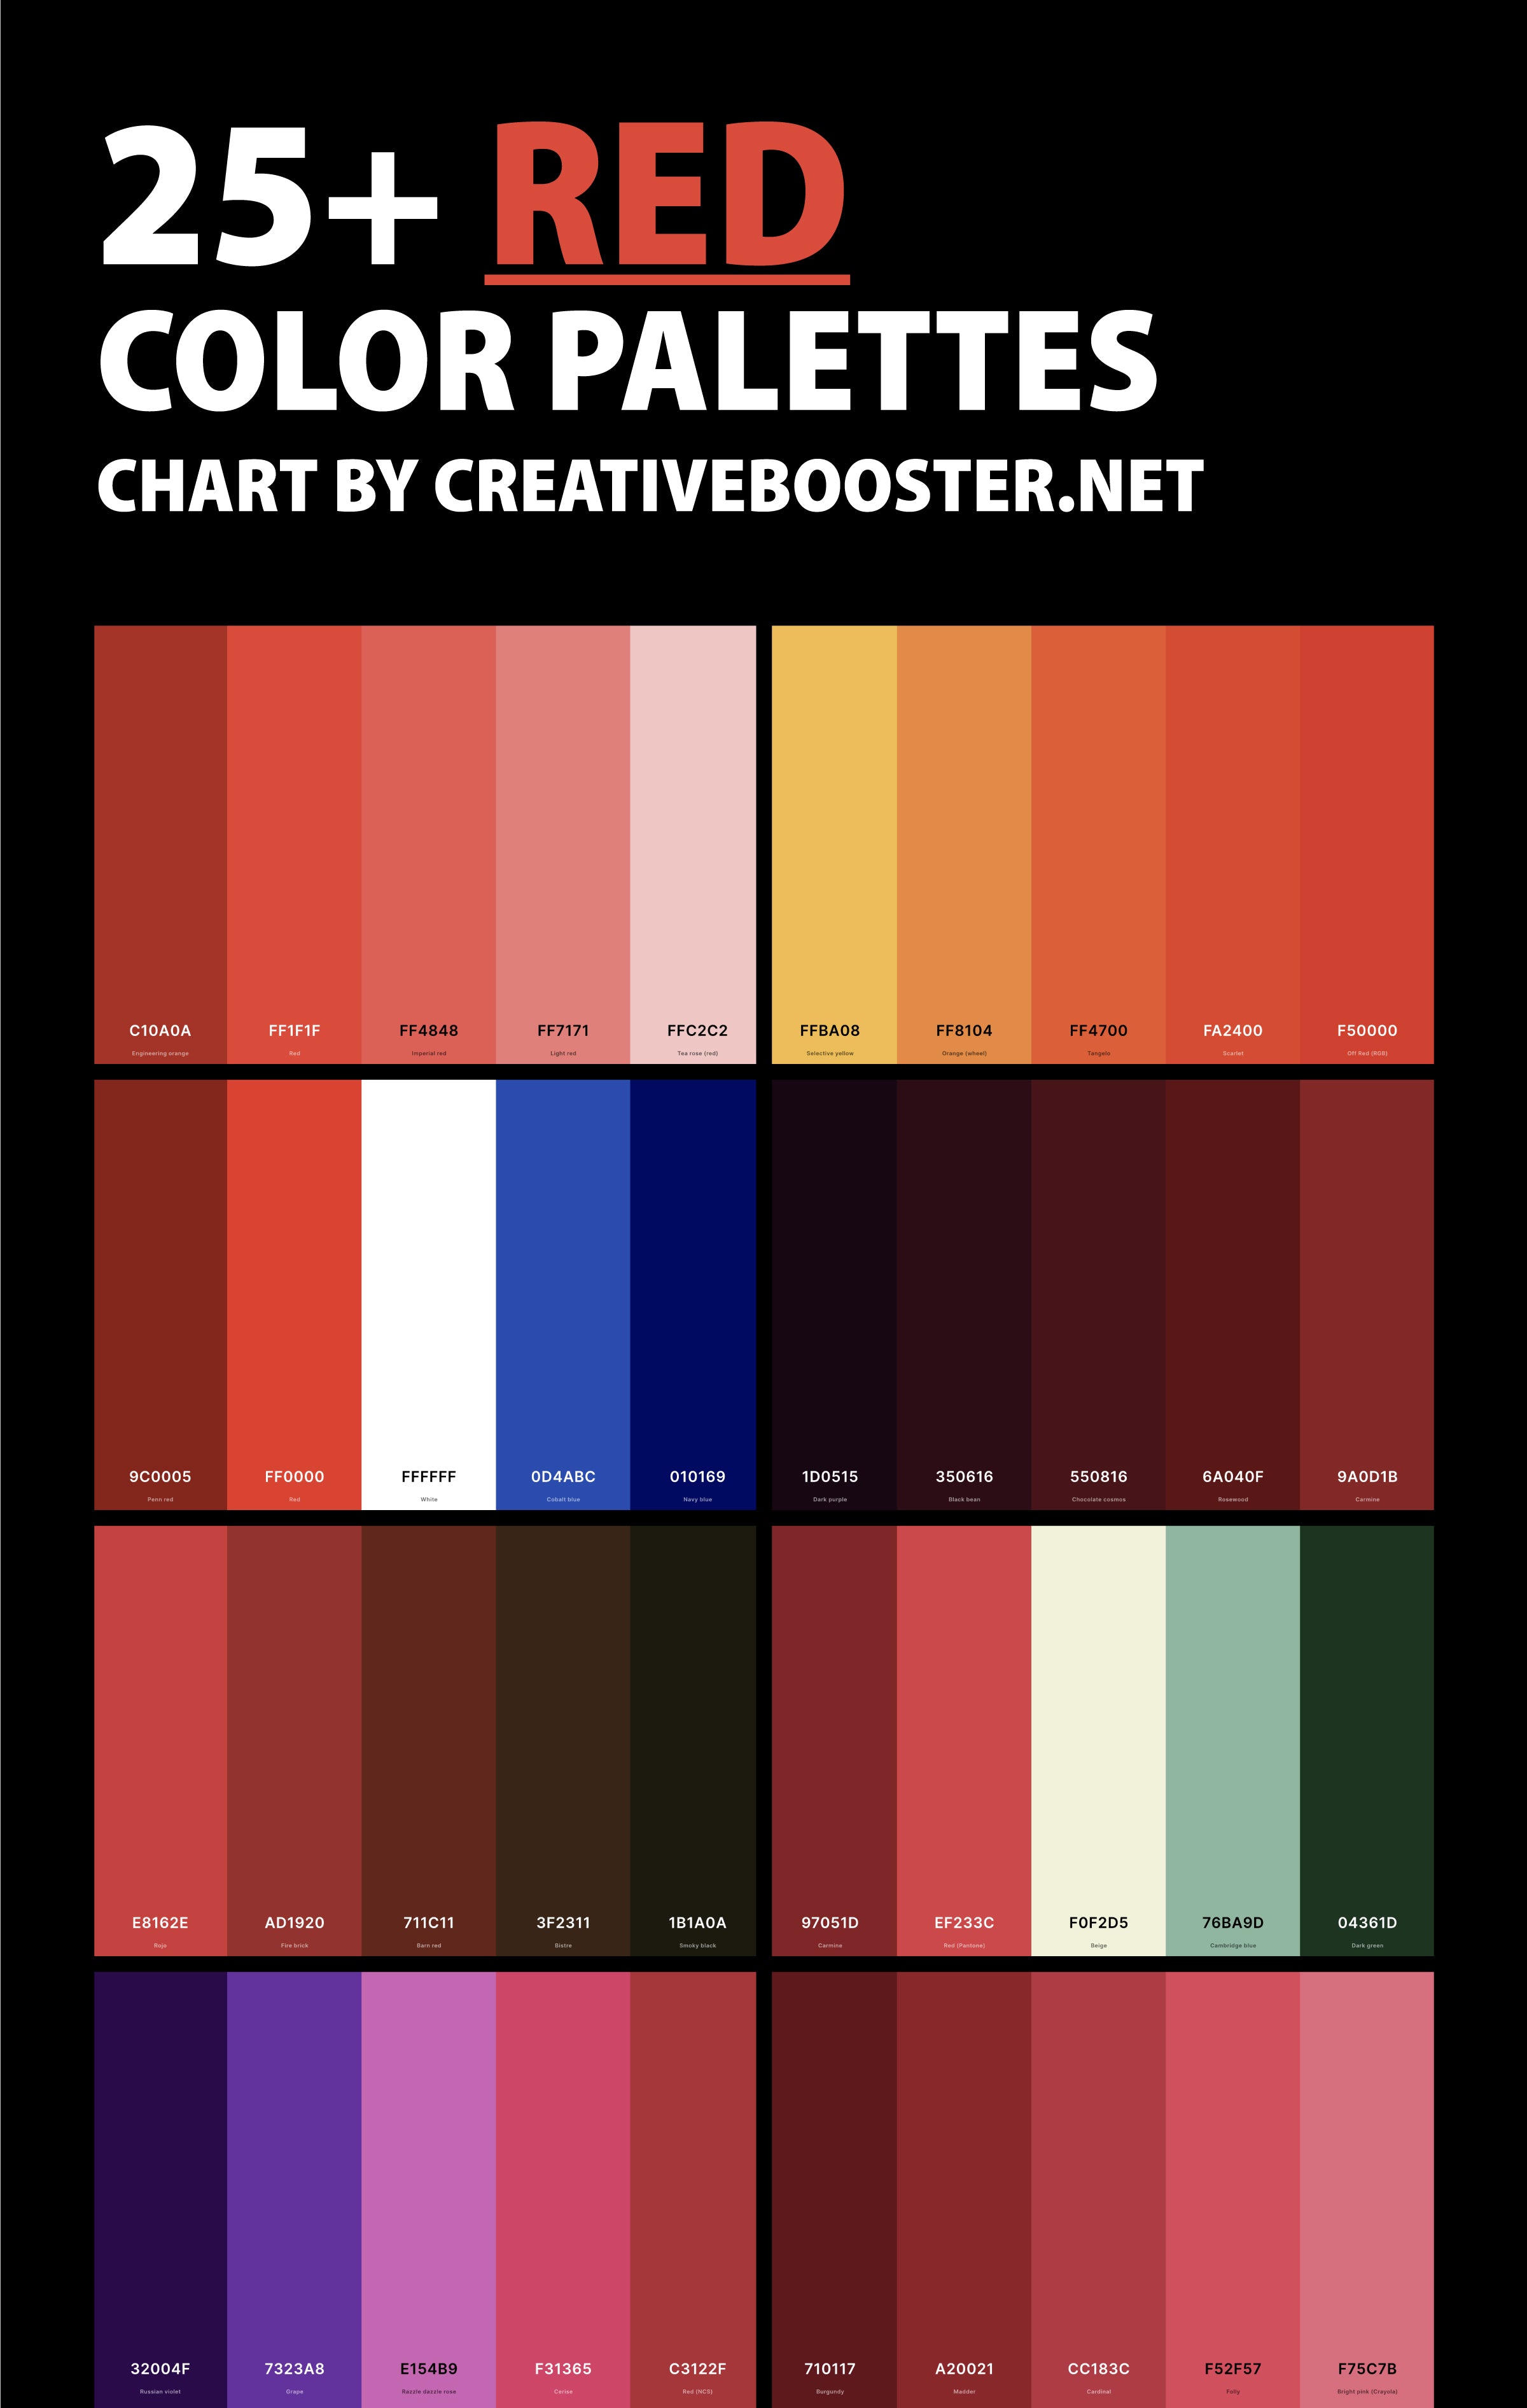 red-color-palettes-chart-with-names-and-hex-codes-pinterest